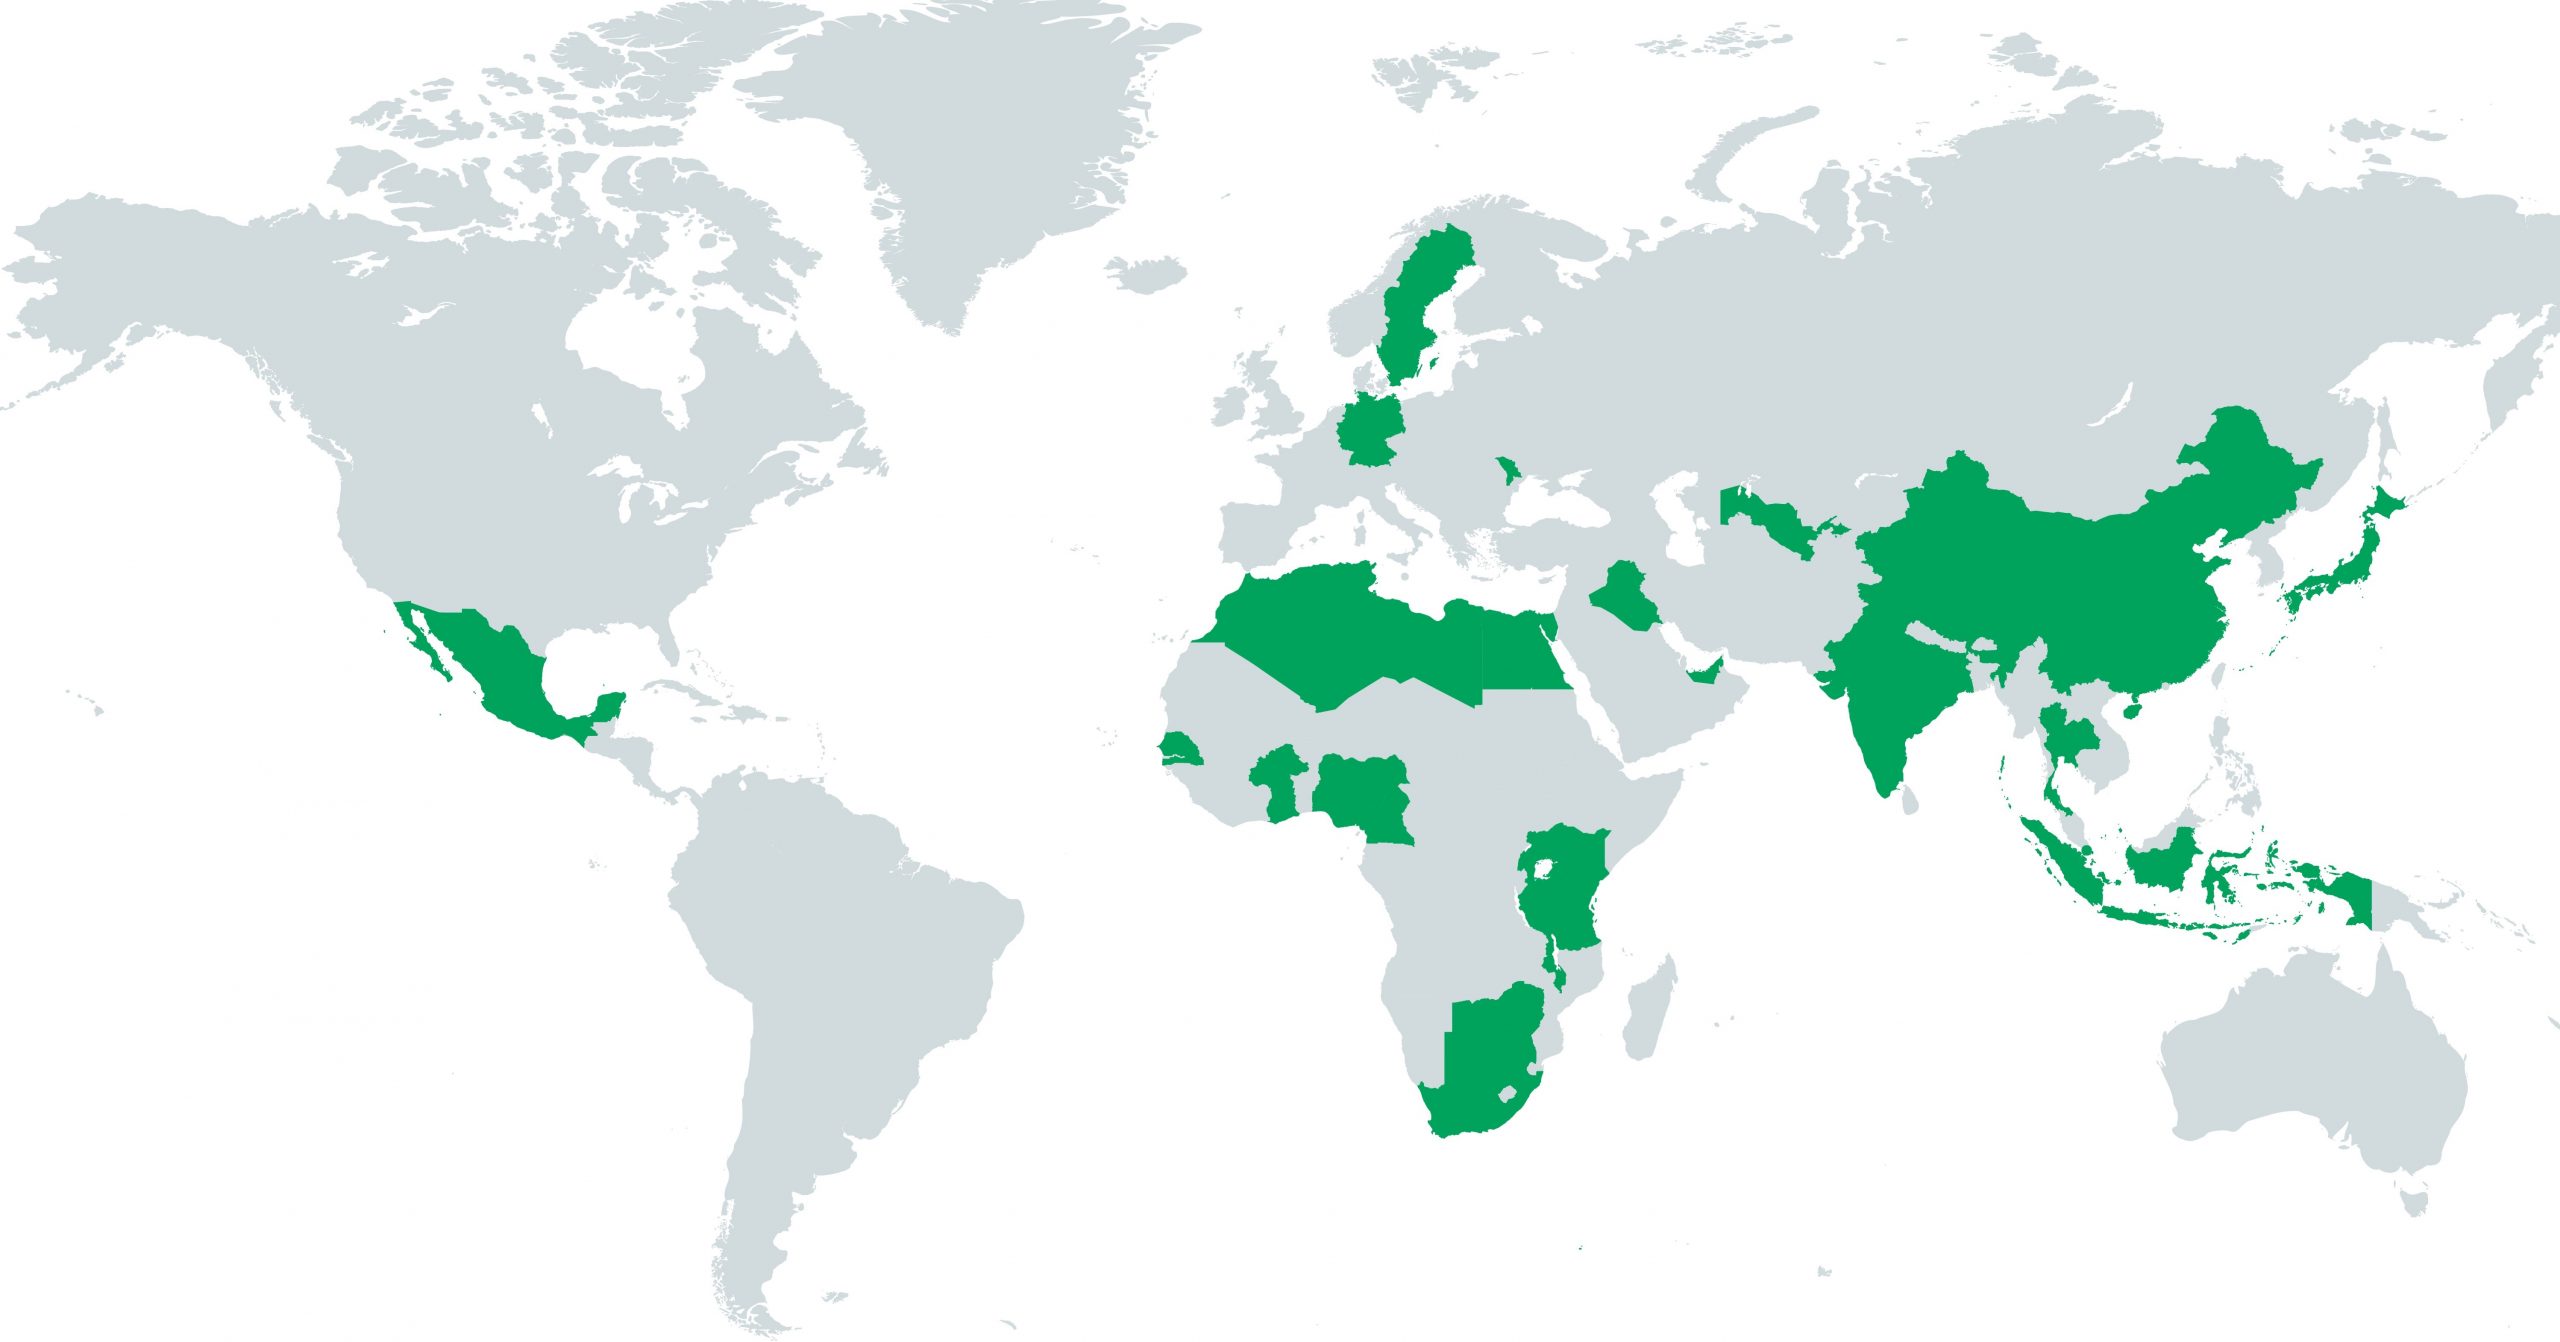 Map of the world highlighting enpacts active regions